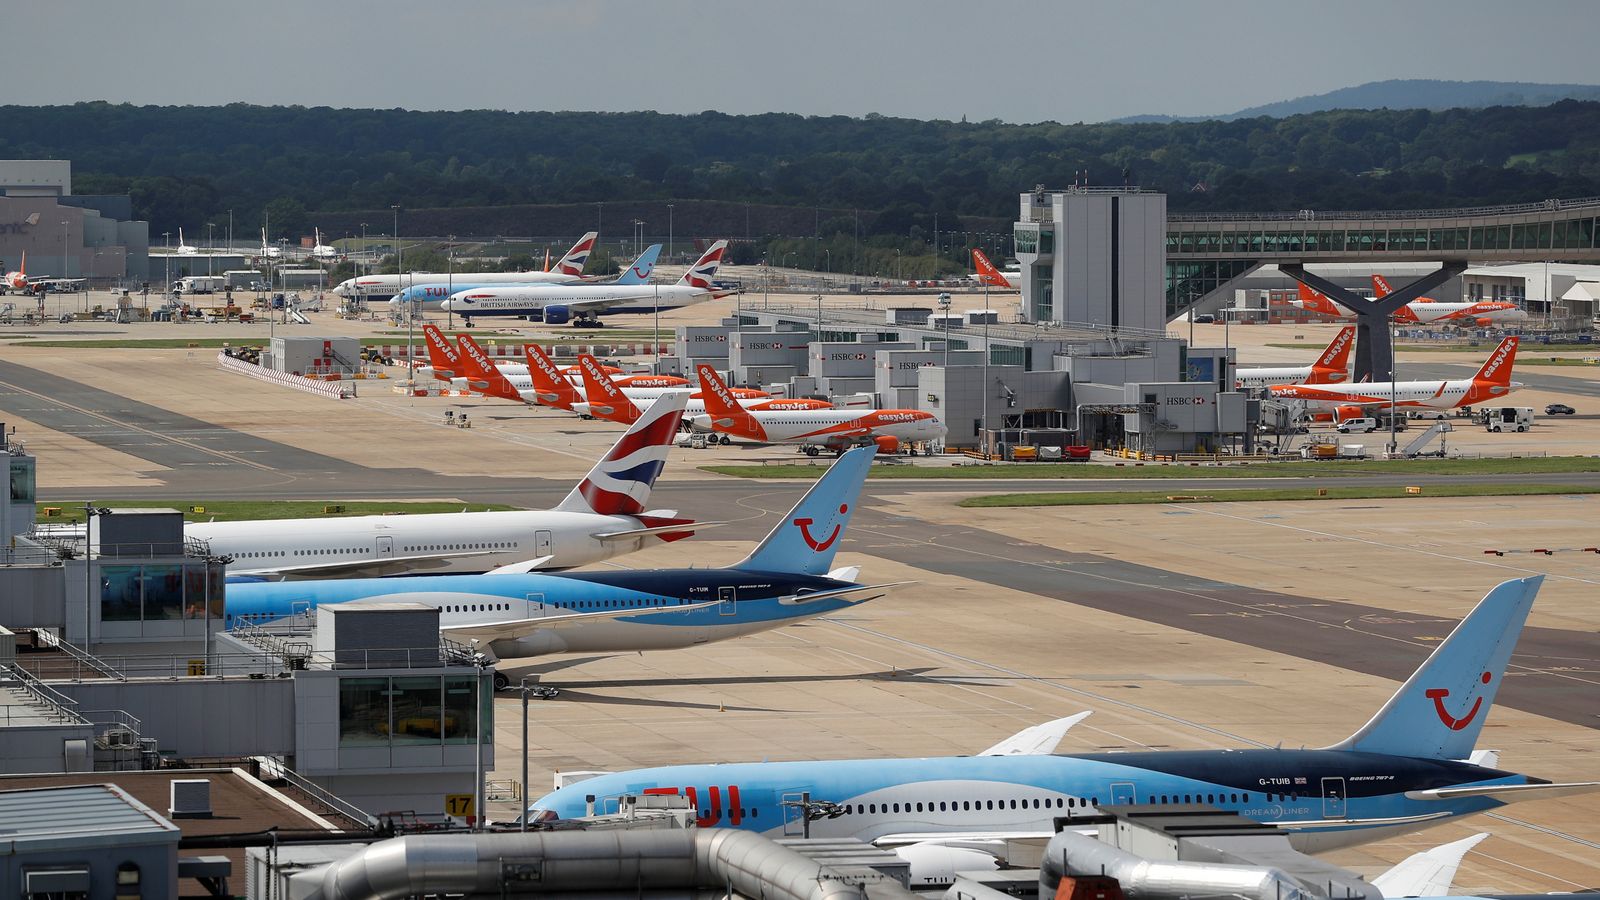 Gatwick Airport temporarily limits flight numbers due to staff sickness in air traffic control